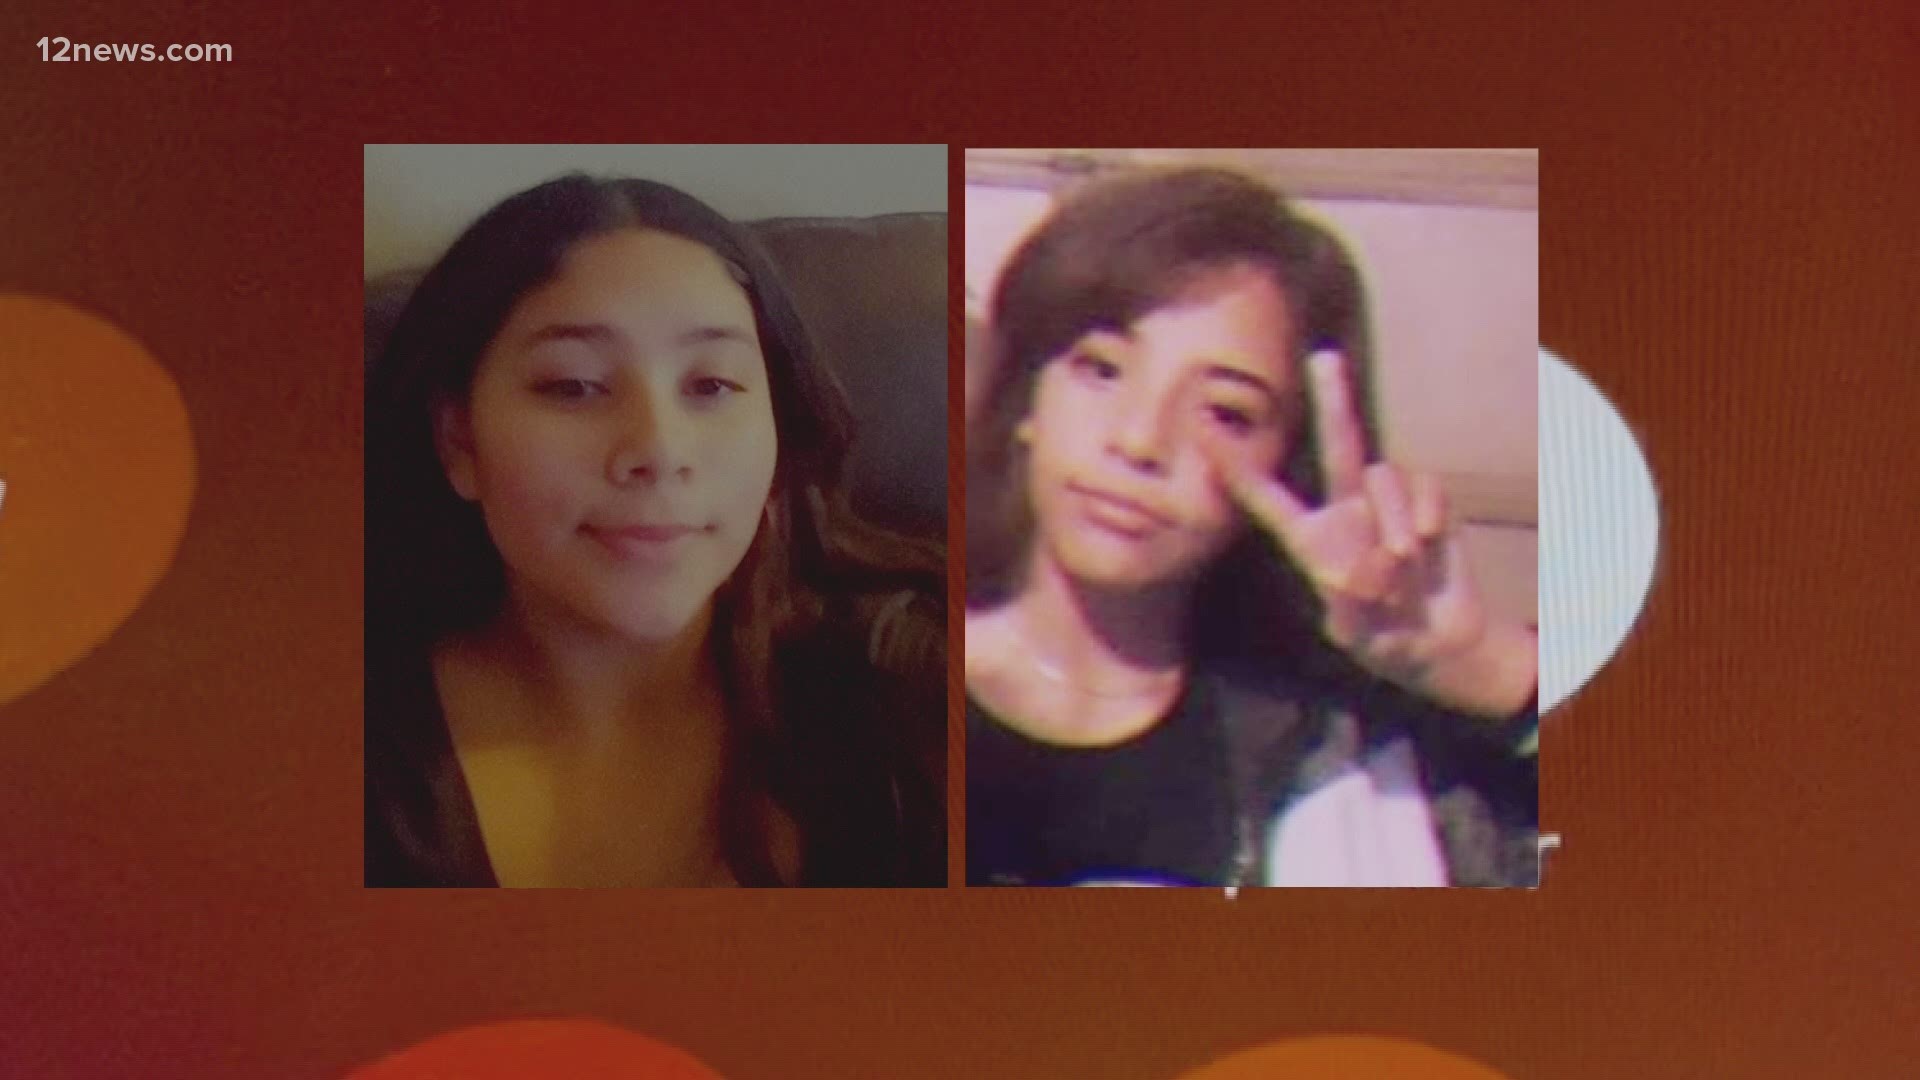 A 13-year-old girl was found dead and a 12-year-old girl was flown to the hospital where she is in extremely critical condition.